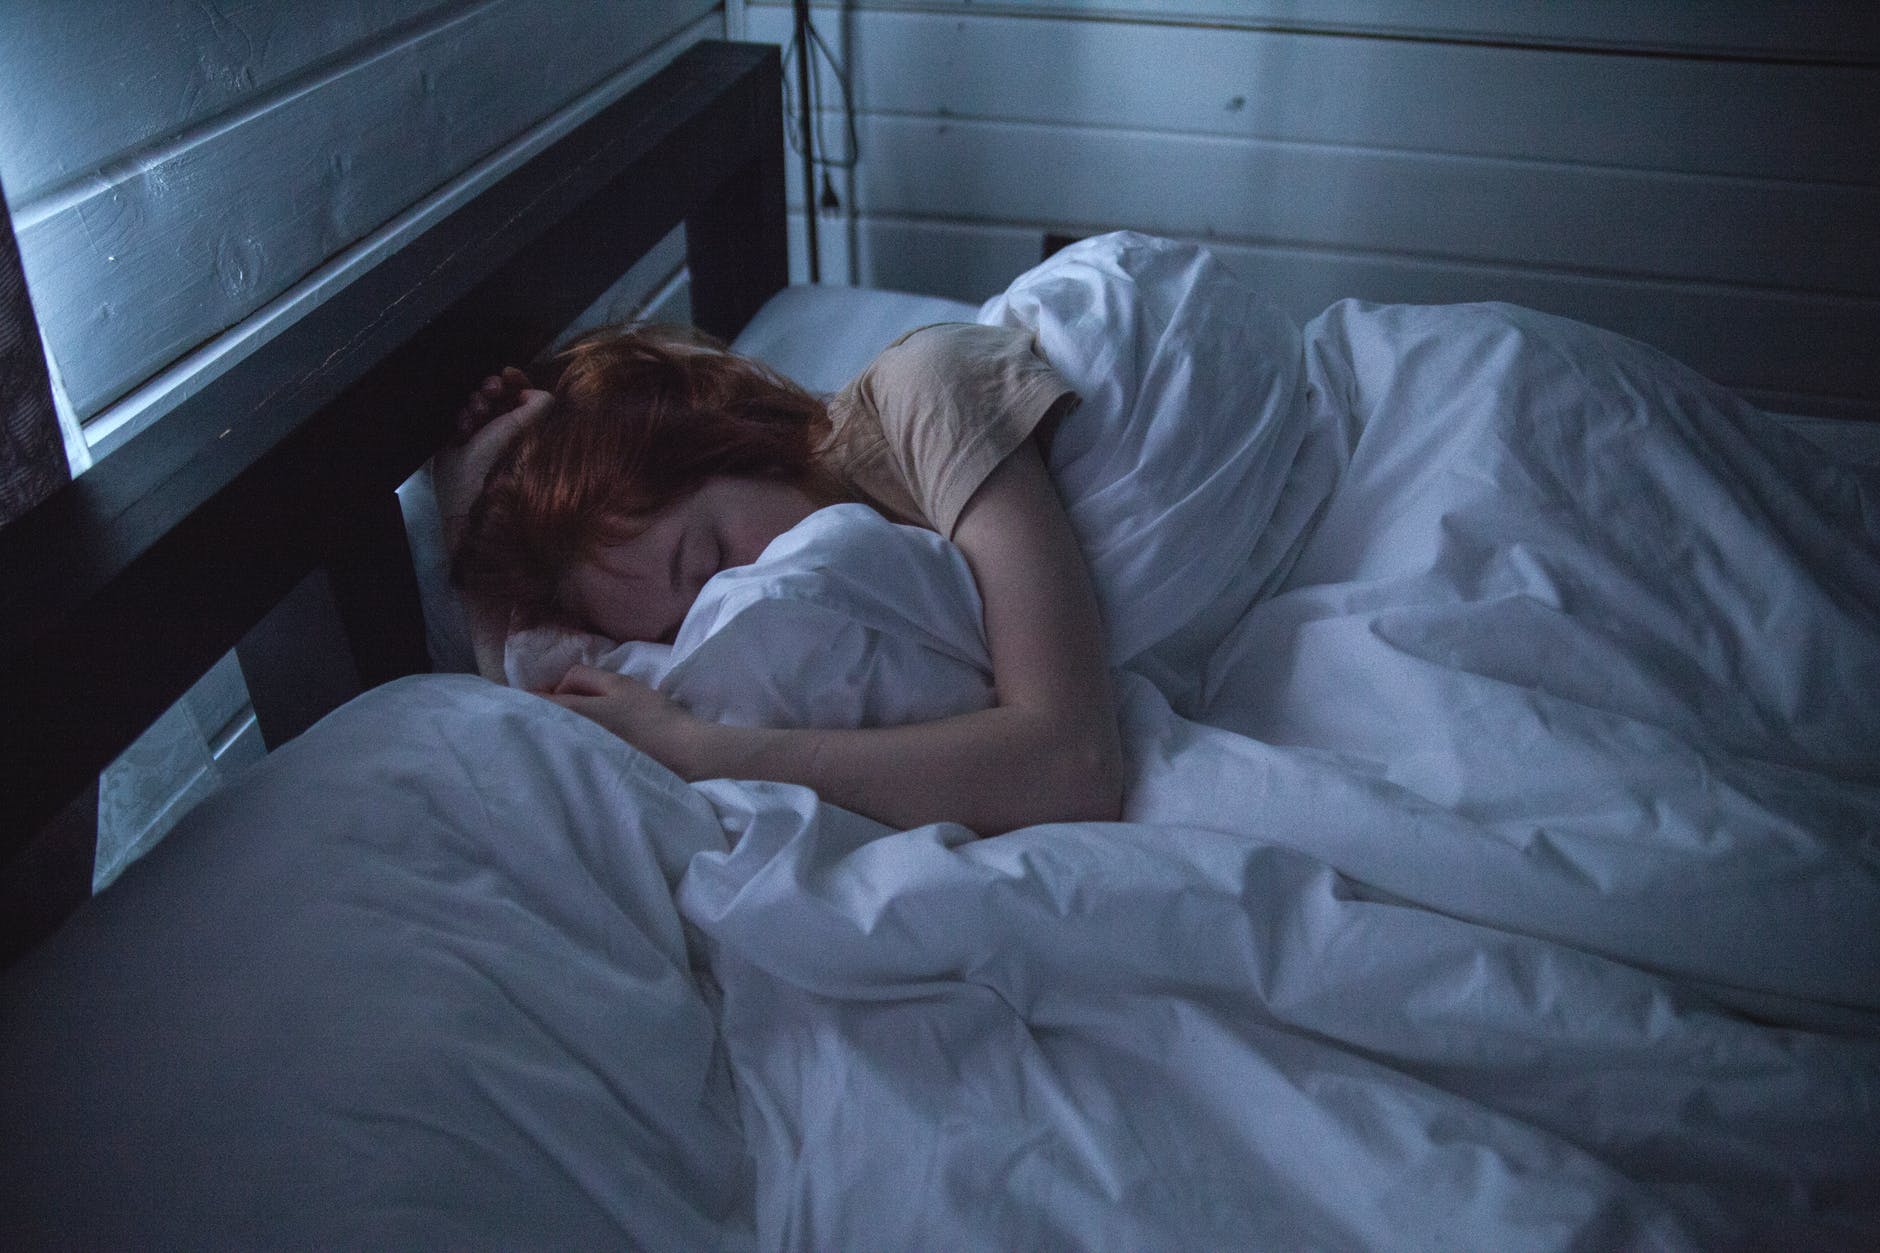 What kind of sleeper are you?